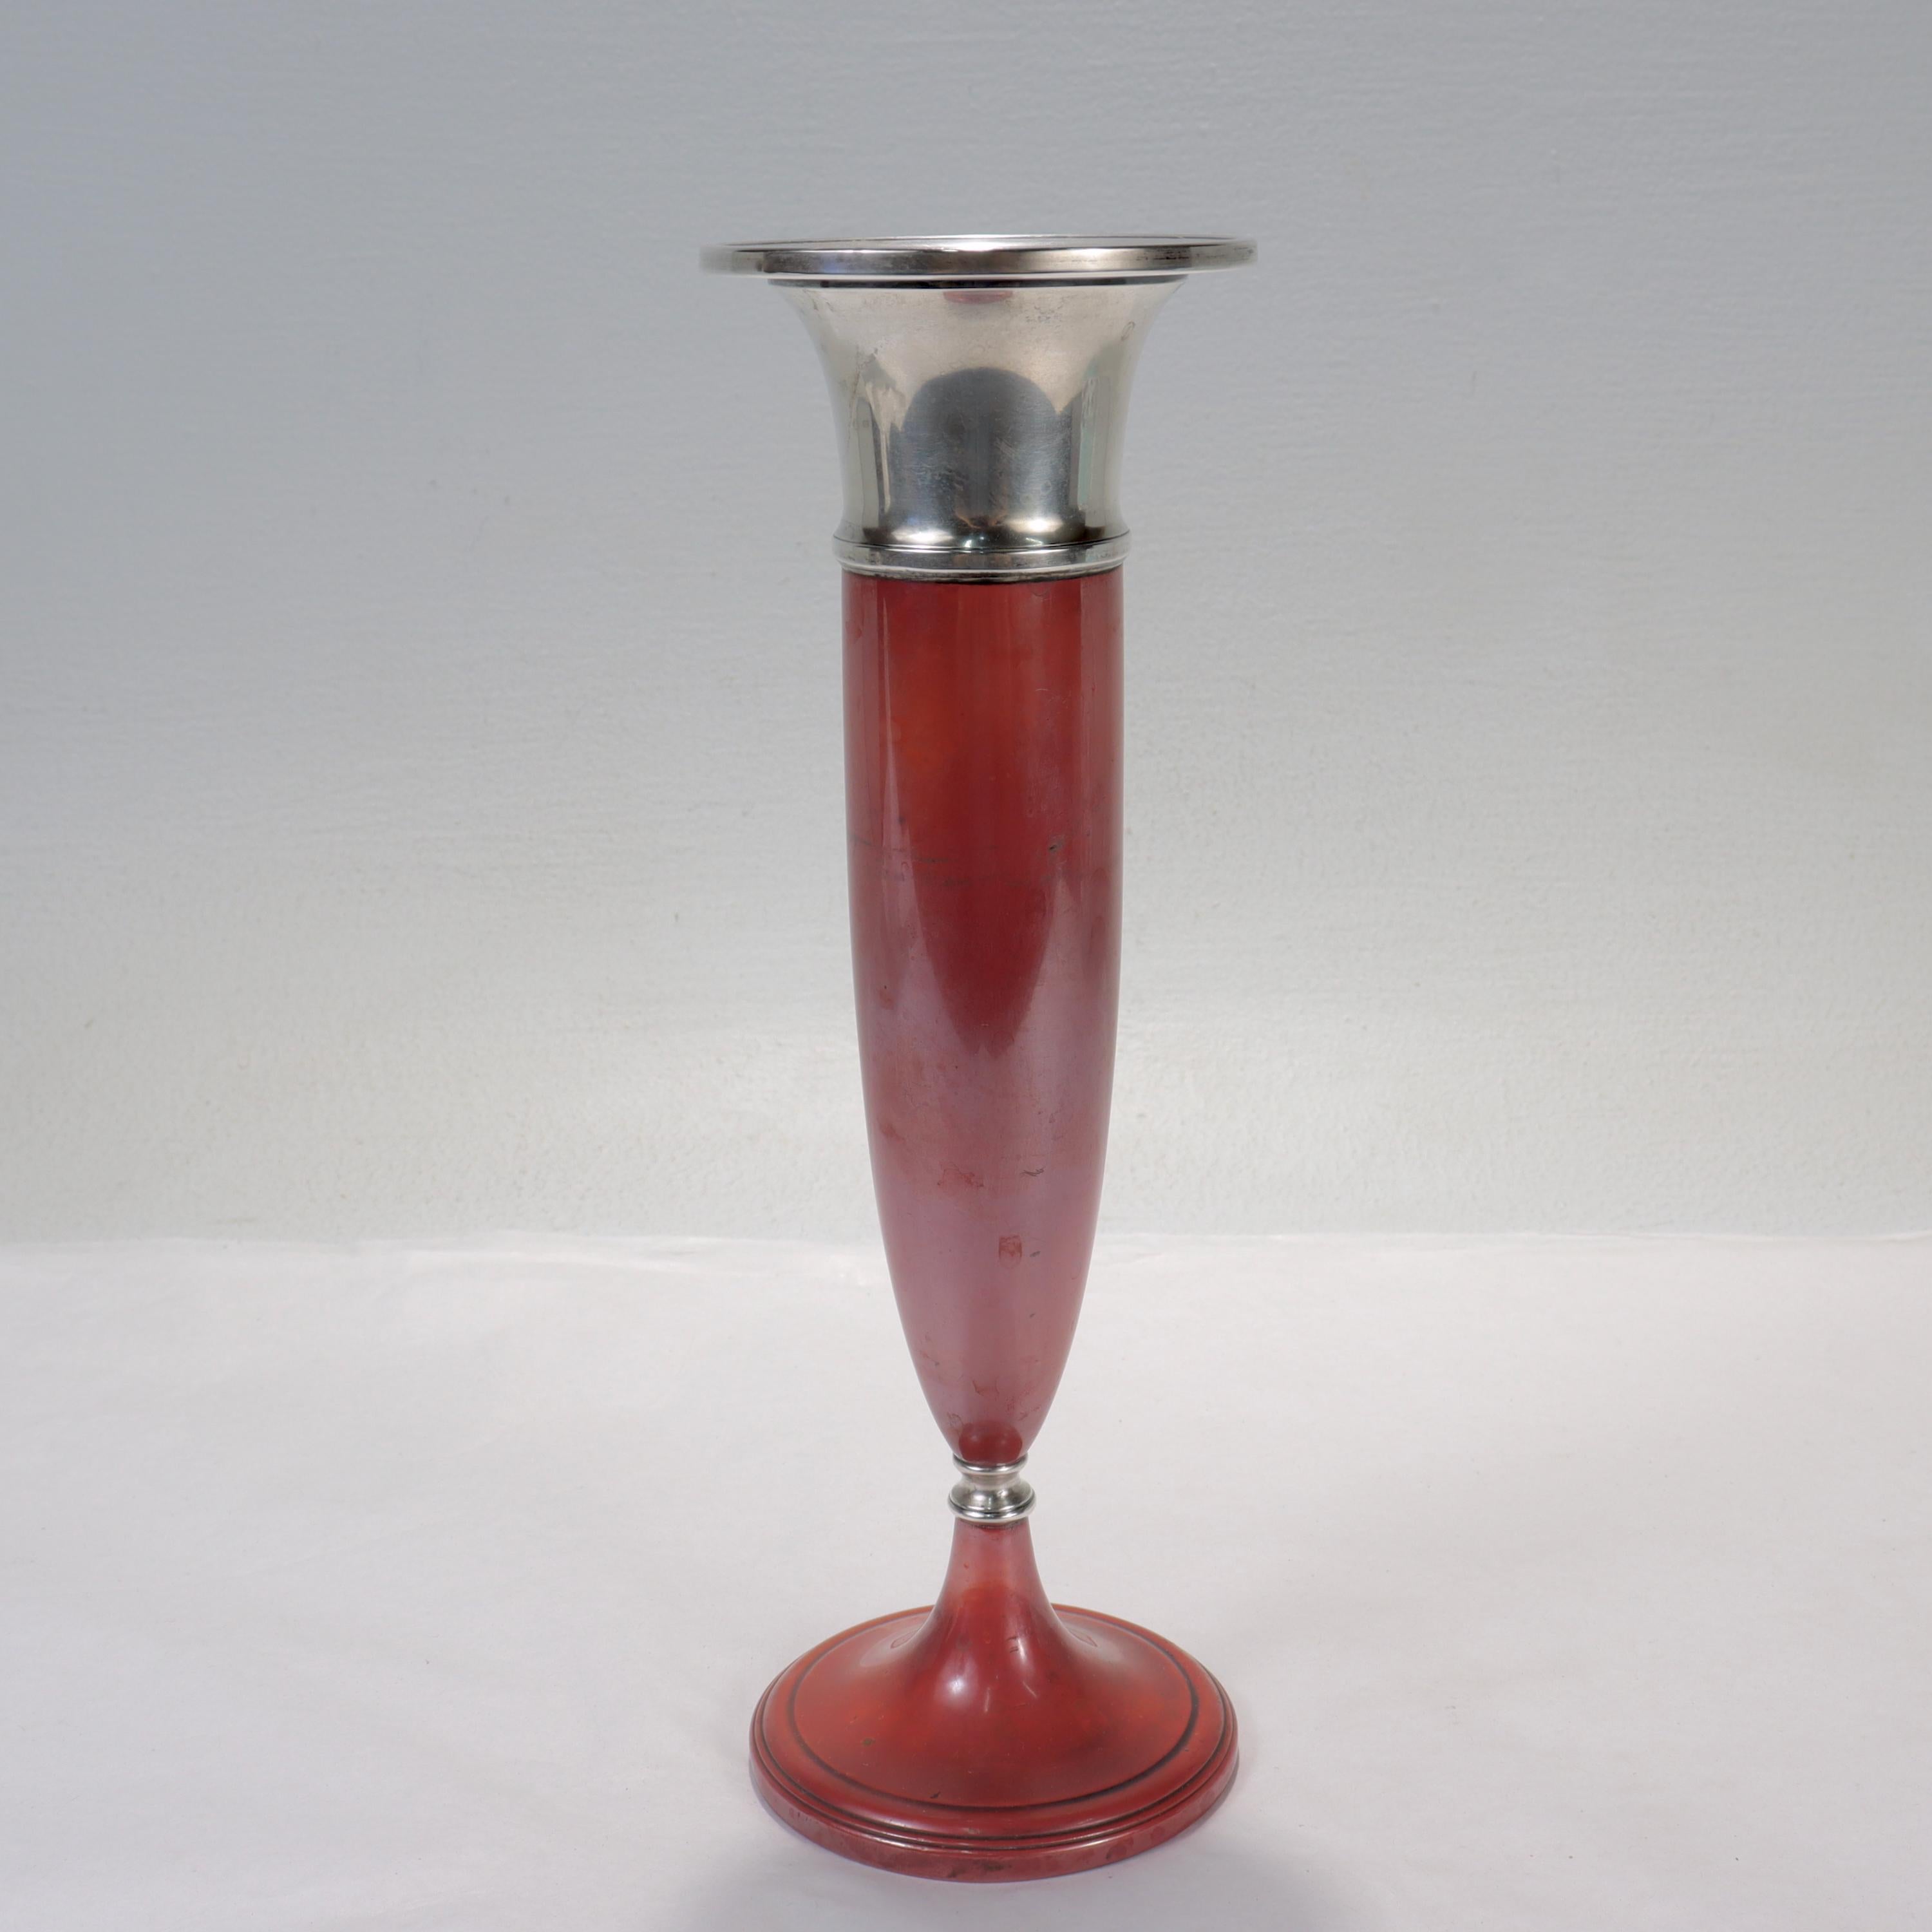 Art Deco La Pierre Babylonian Mixed Metals Sterling Silver & Copper Vase In Good Condition For Sale In Philadelphia, PA